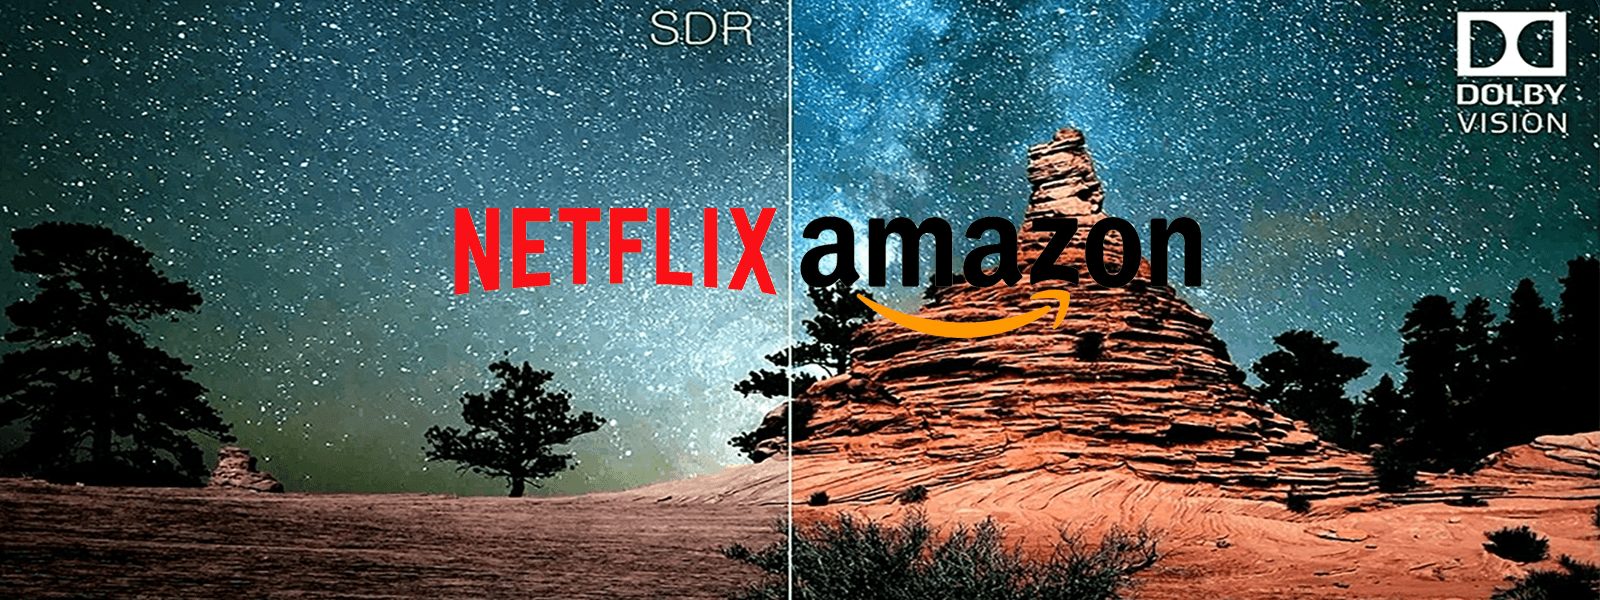 Amazon & Netflix 4K Content HDR, Dolby Atmos & Dolby